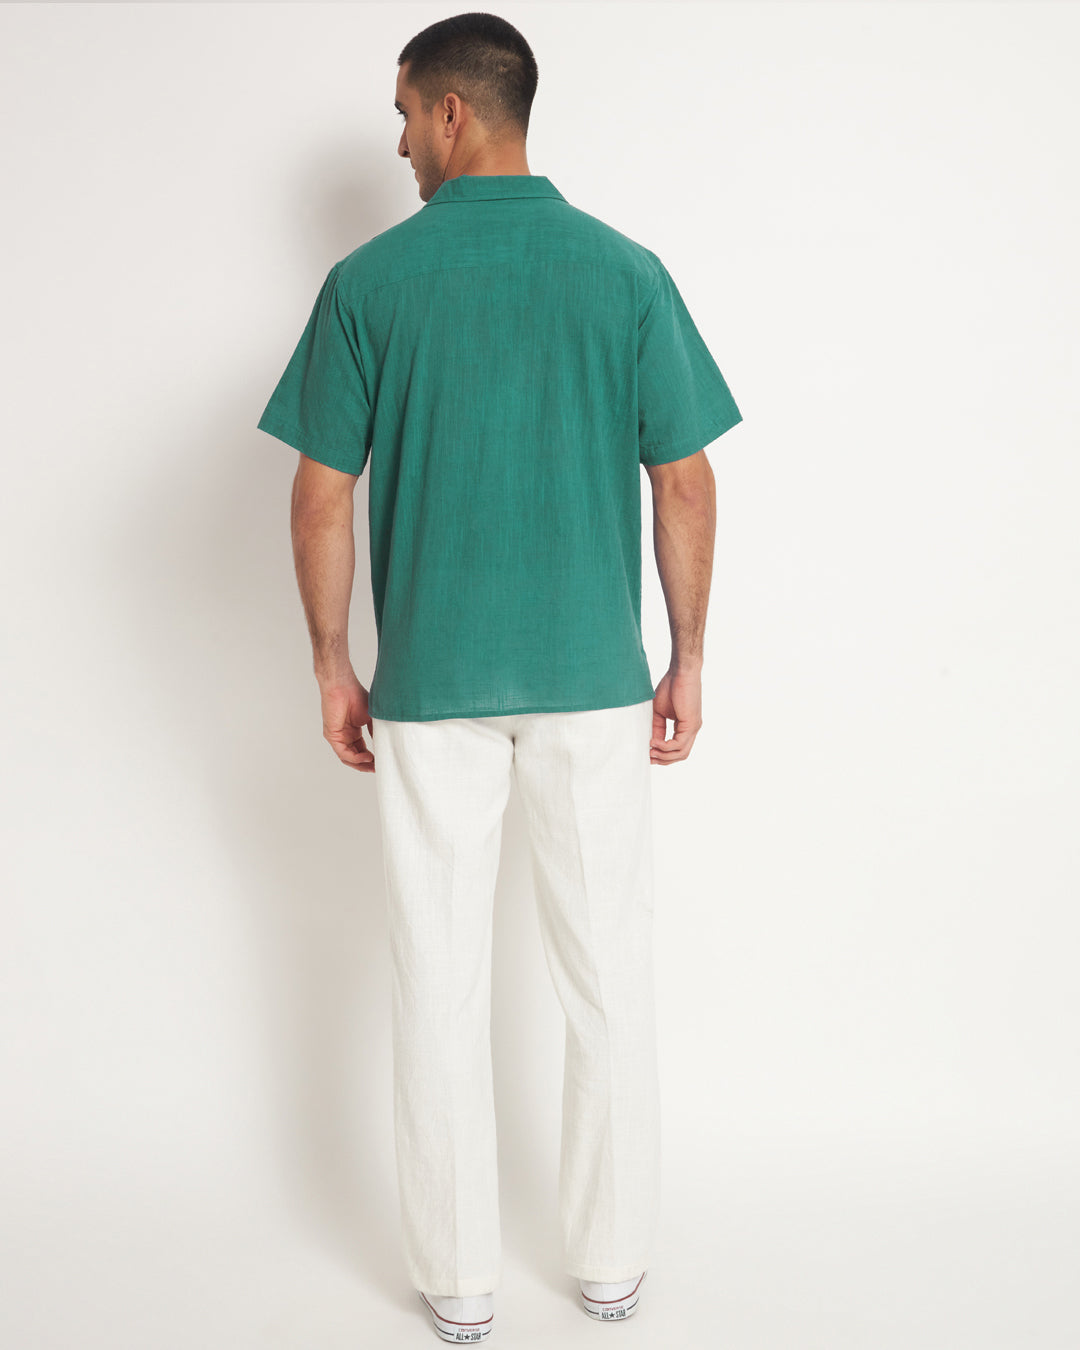 Combo: Classic Forest Green Half Sleeves Men's Shirt & Pants